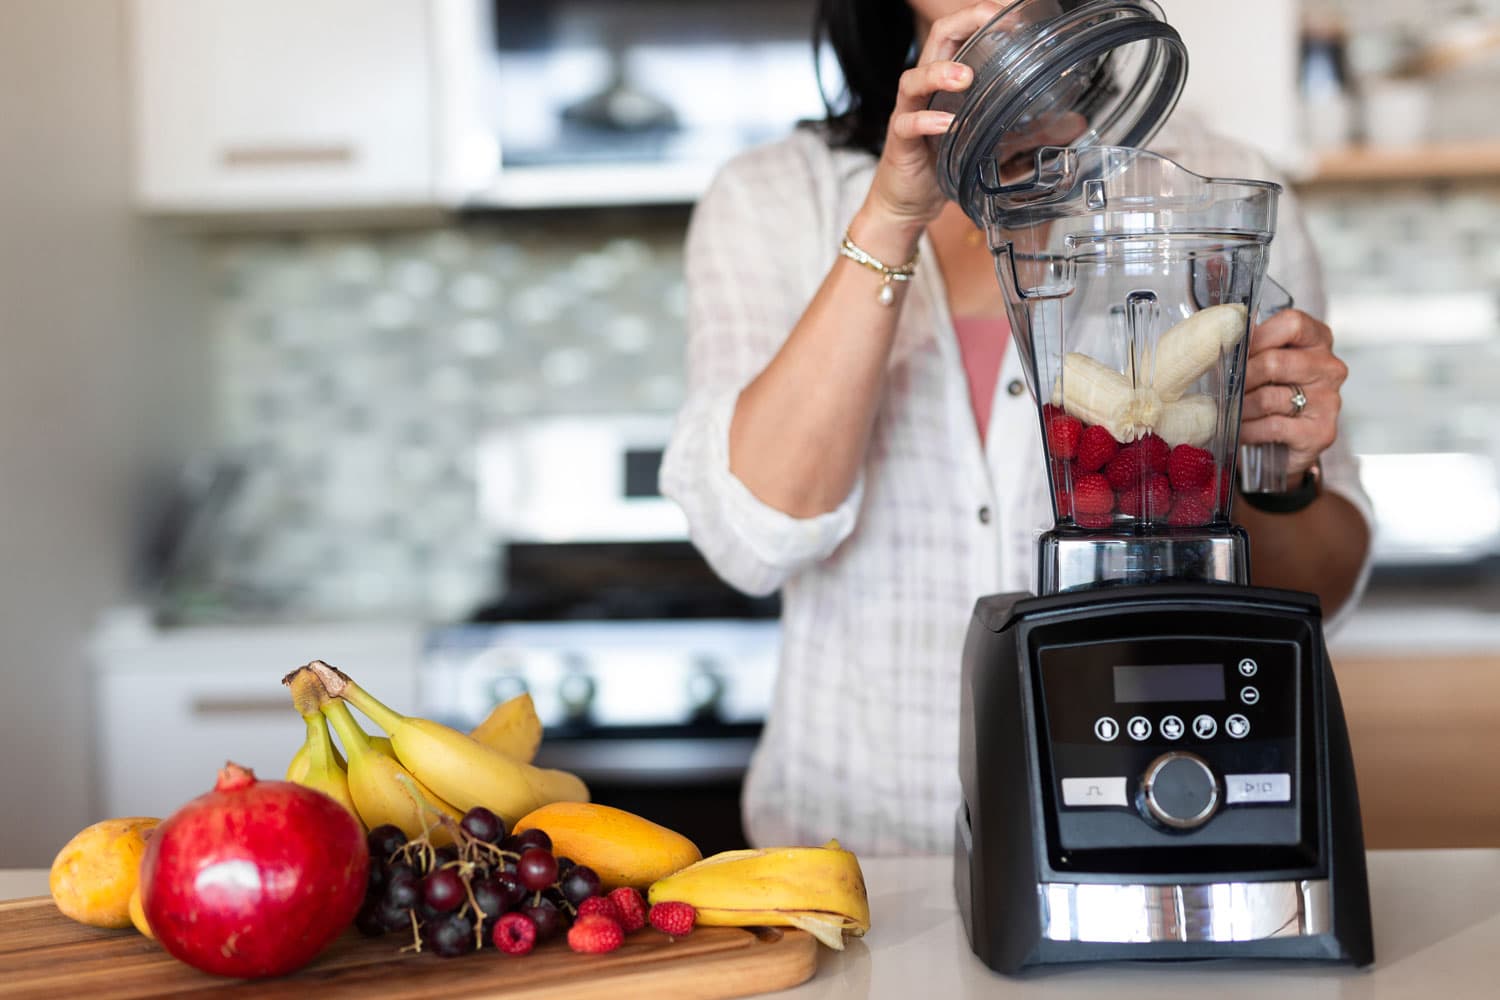 Woman making smoothie in the kitchen using Vitamix blender